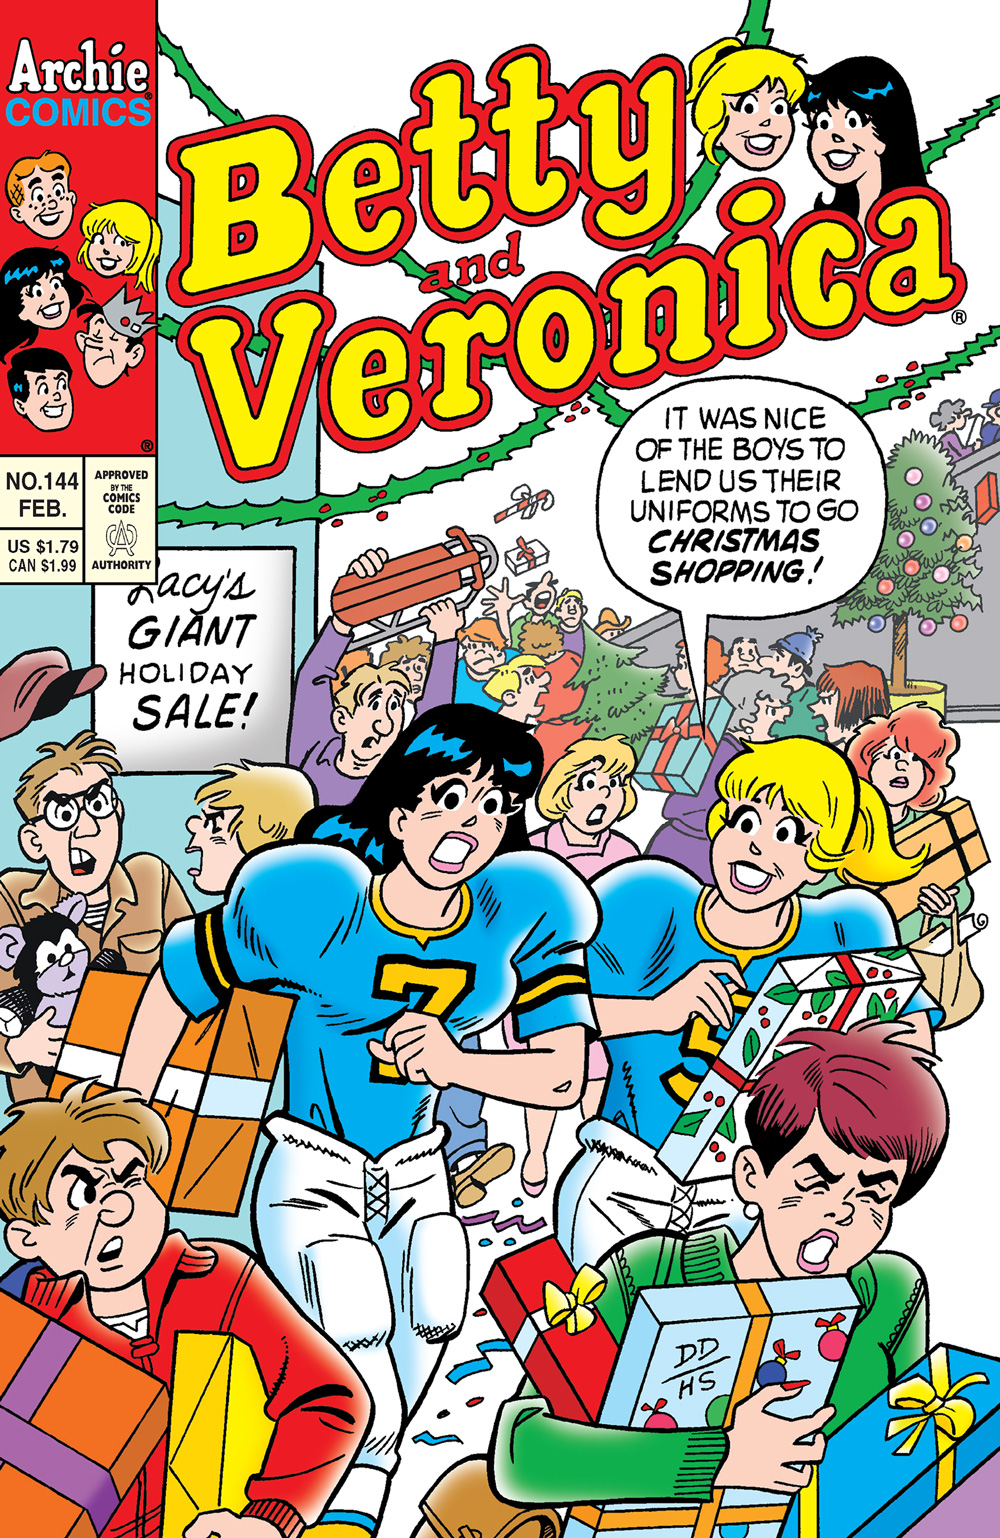 Betty and Veronica are at the mall for a crowded holiday sale, wearing football uniforms to protect themselves from everyone.